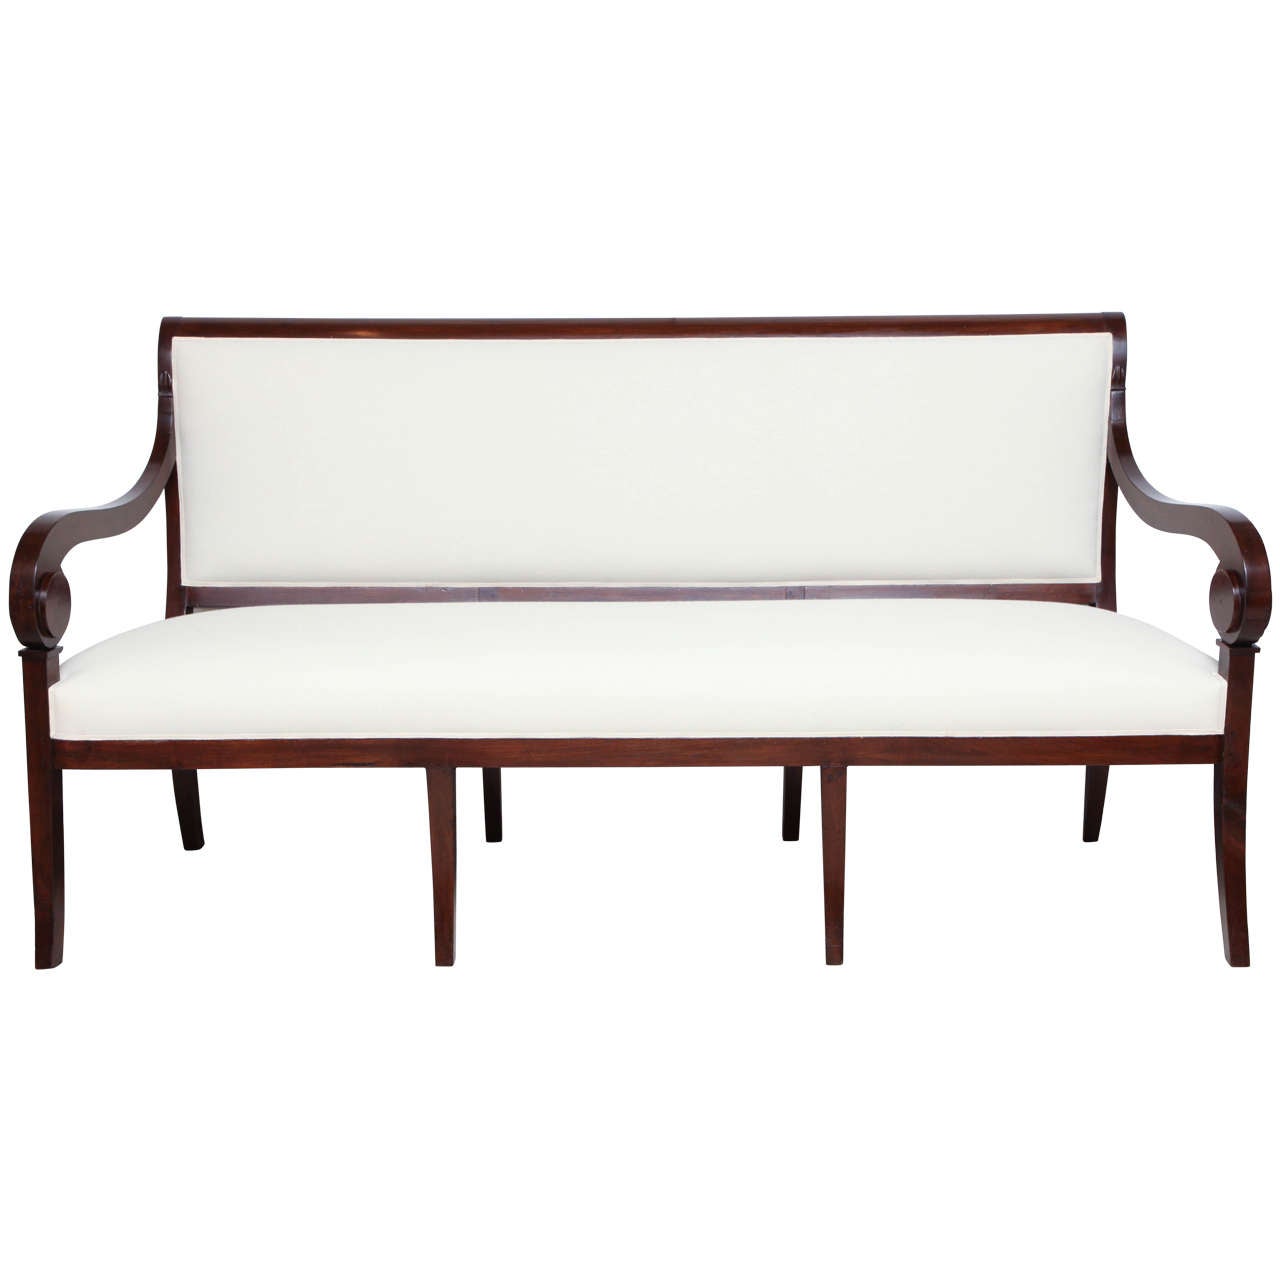 19th Century French Mahogany Wood Bench with Scroll-Form Arms and Tapered Legs